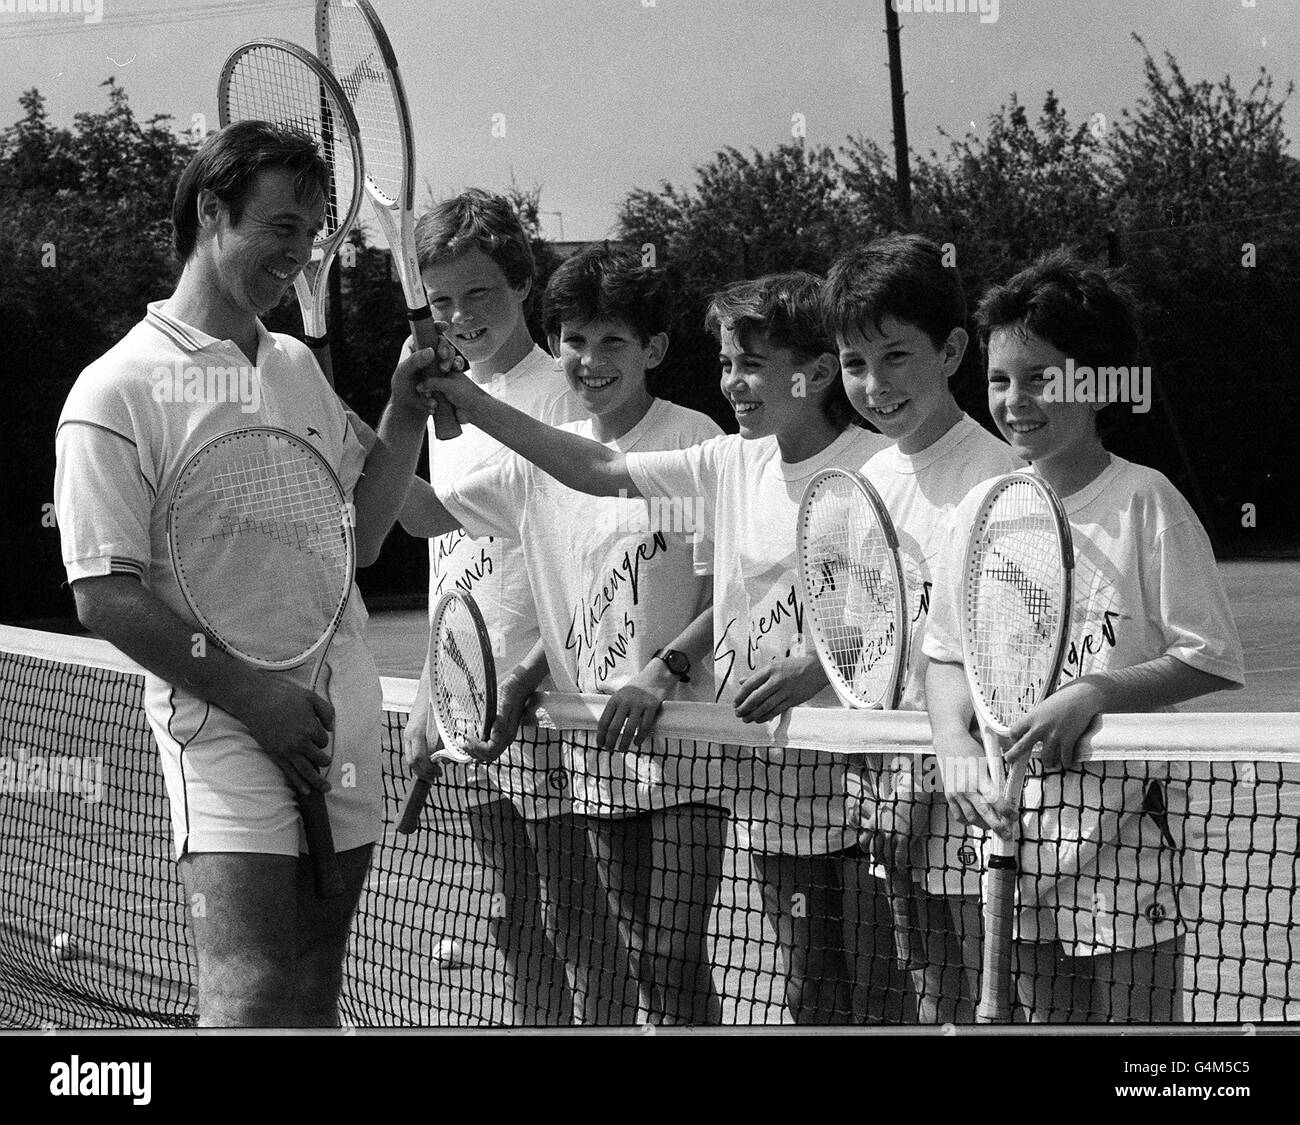 Tim Henman aged 13 (2nd boy from left), with head coach David Lloyd at the Slasenger Raquet Club. The Club had a scholarship scheme for promising young players, and was the brainchild of financier Jim Slater. * Boys (from left): James Bailey, Tim Henman, David Loosemore, Paul Jessop, James Delgado. Stock Photo